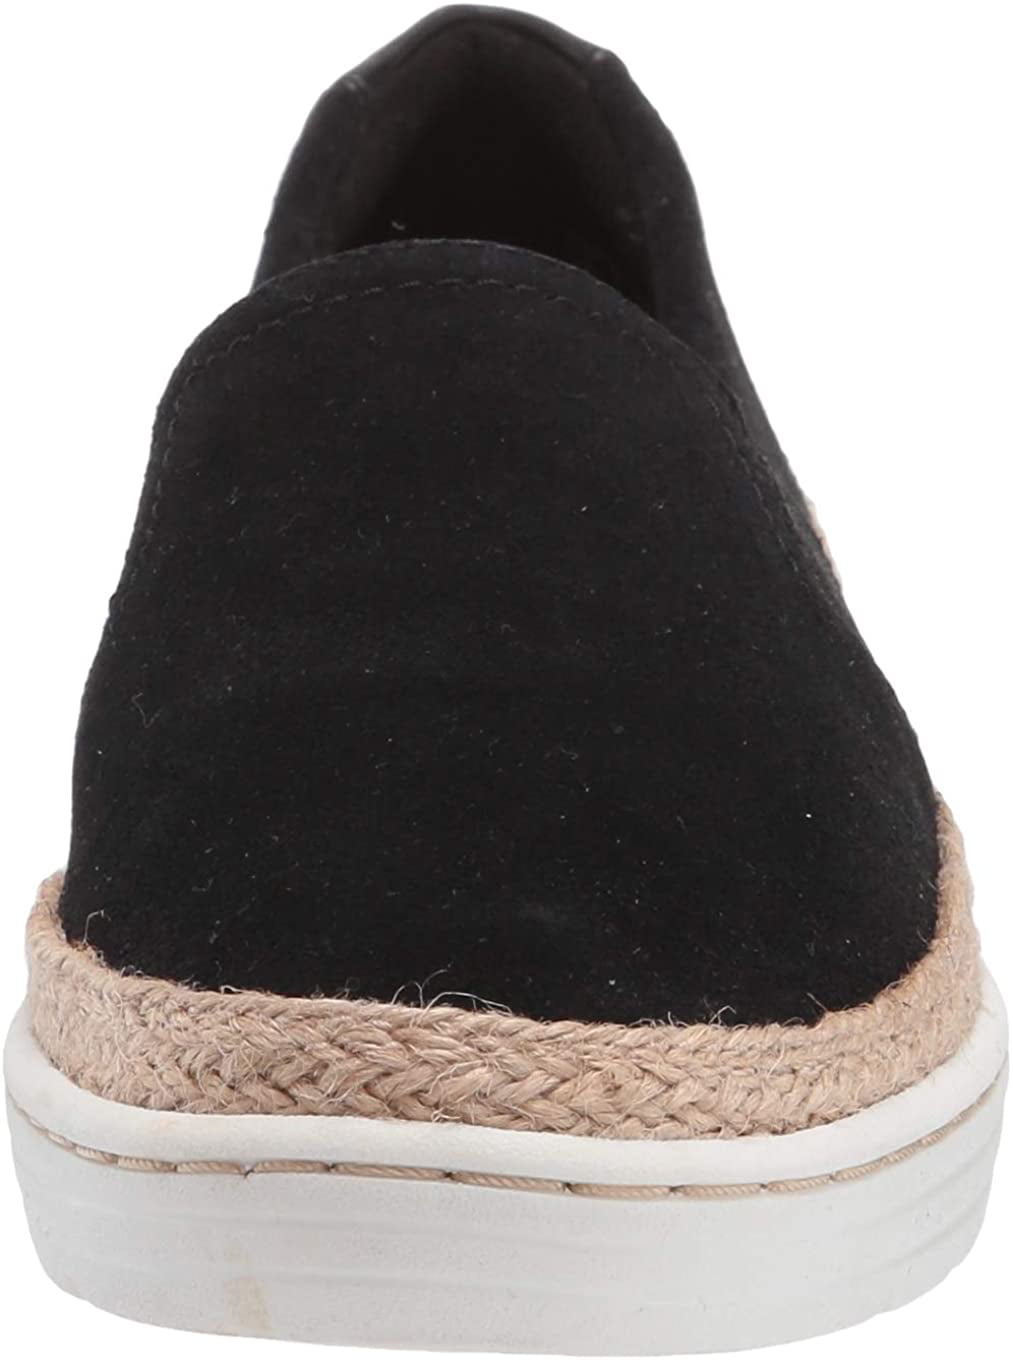 Details about   Clarks Women's Marie Sail Loafer Flat 